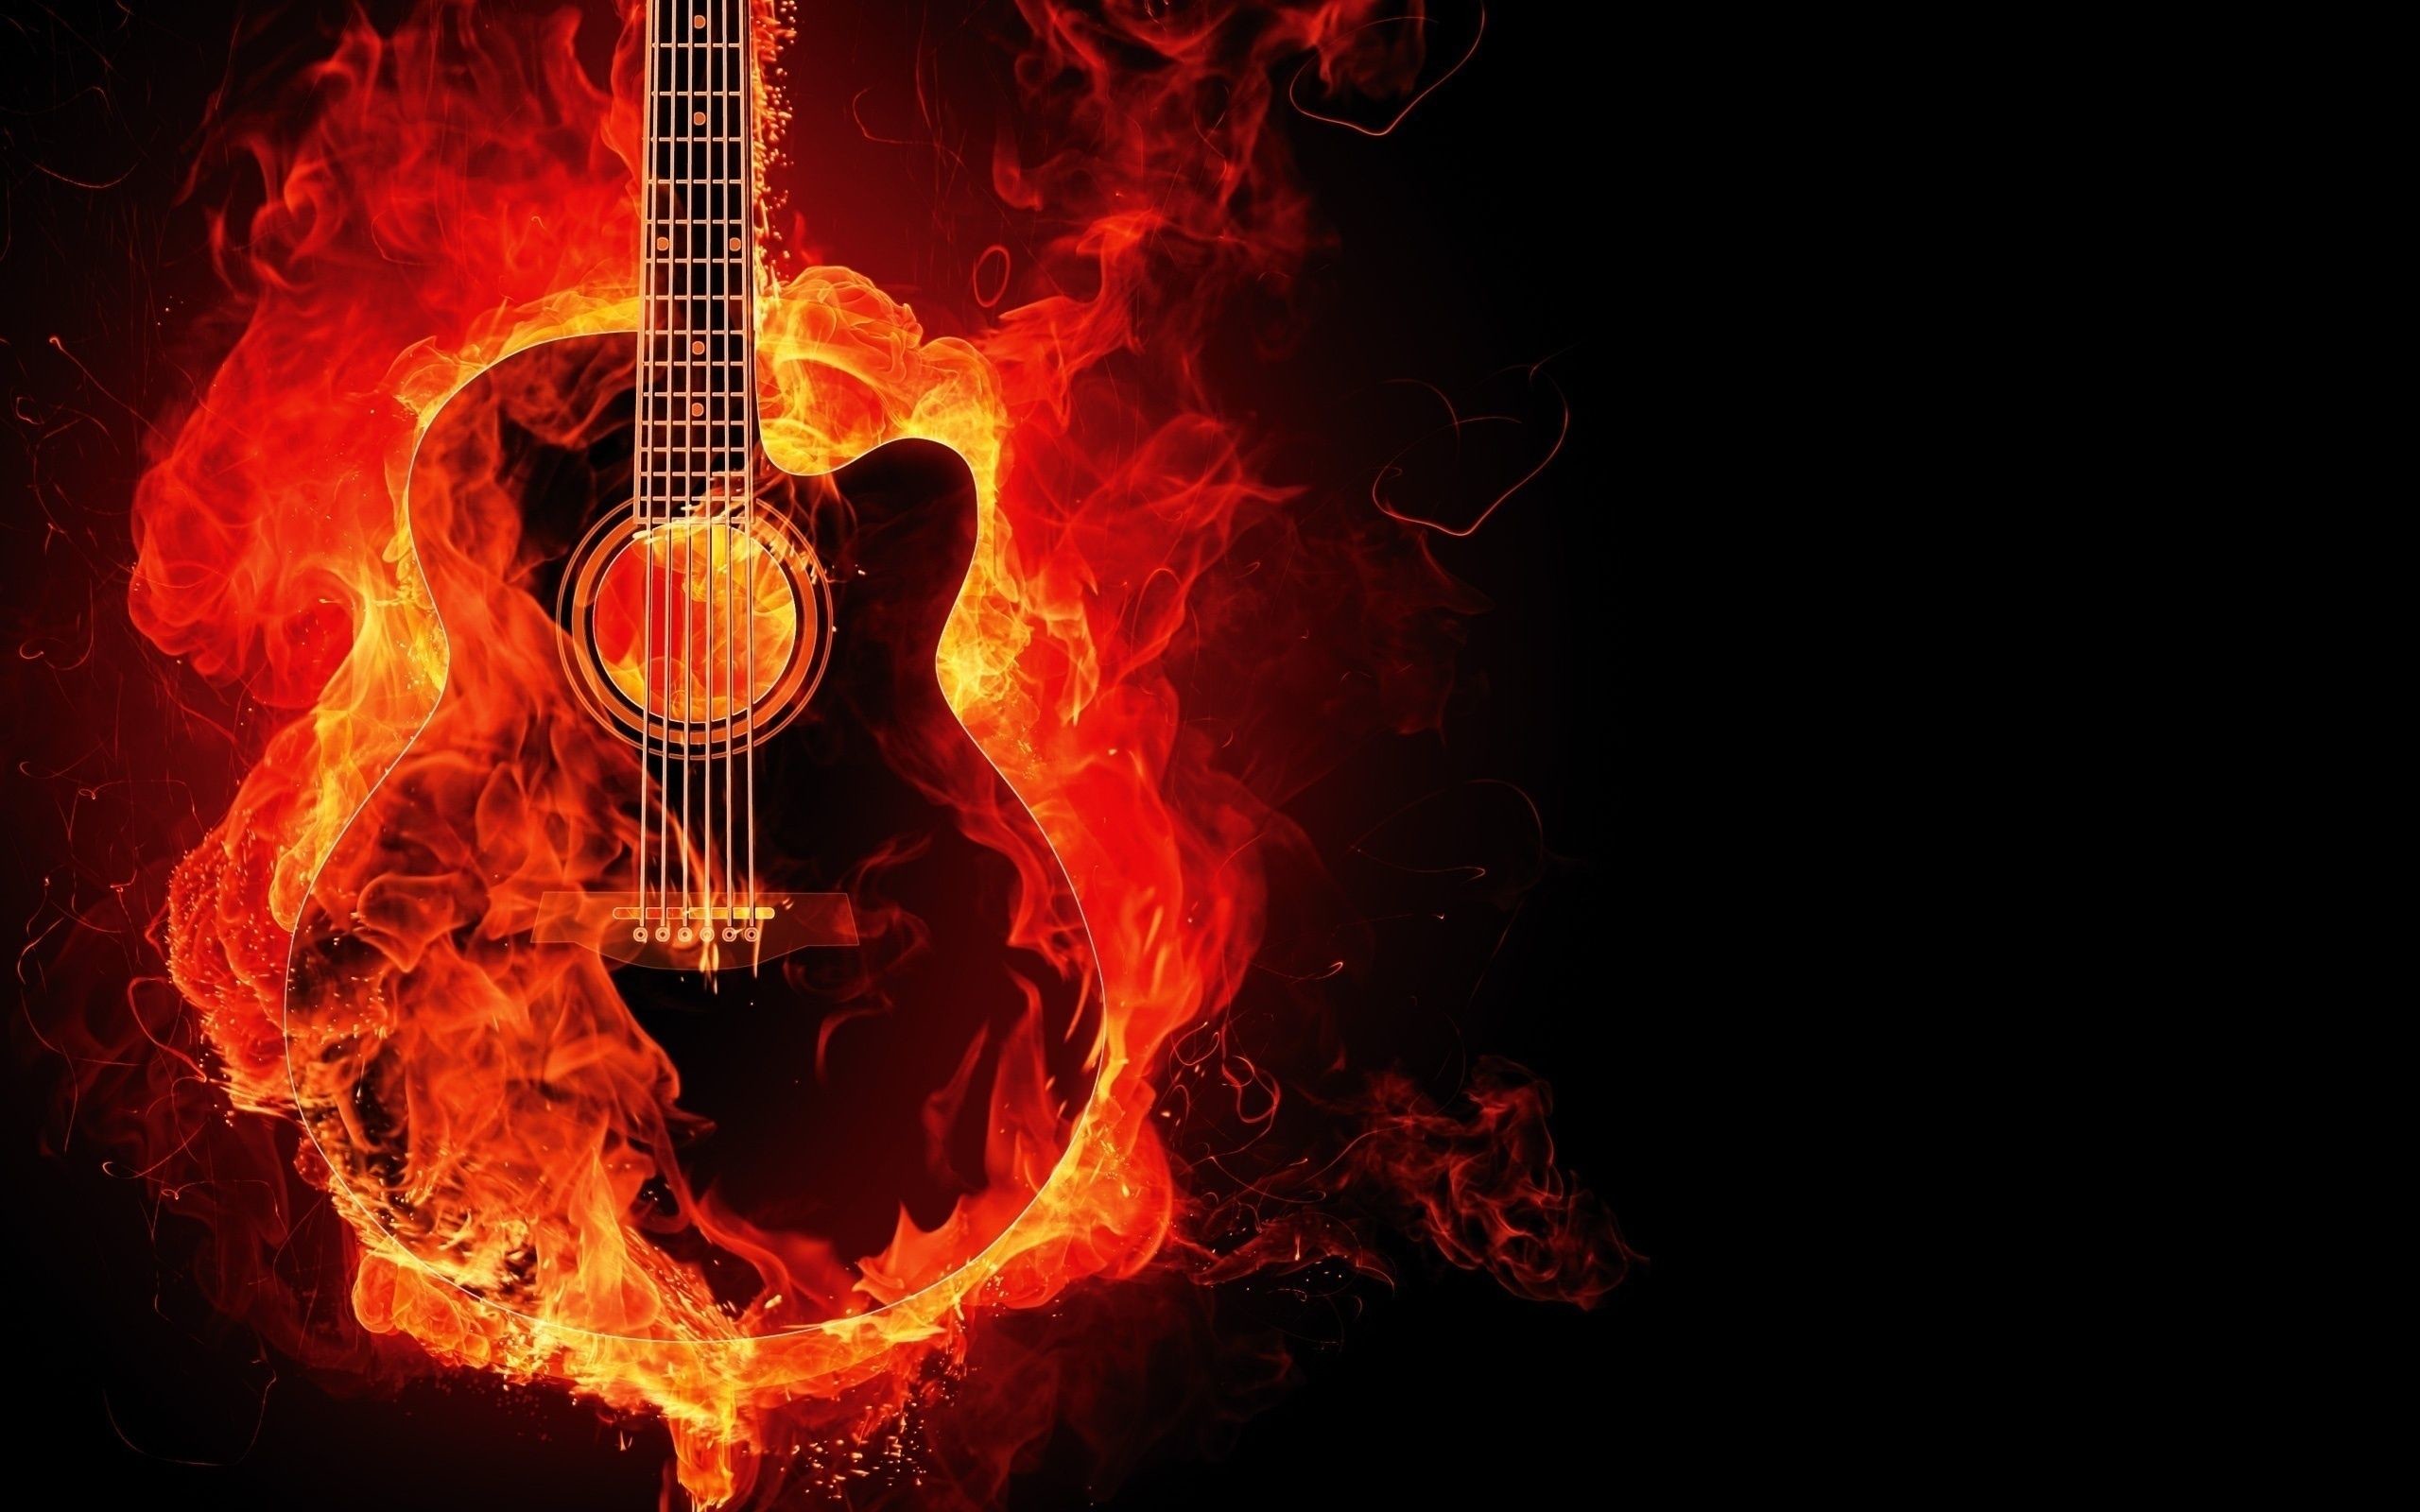 2560x1600 Guitar Full HD Wallpaper and Background Image |  | ID:349923